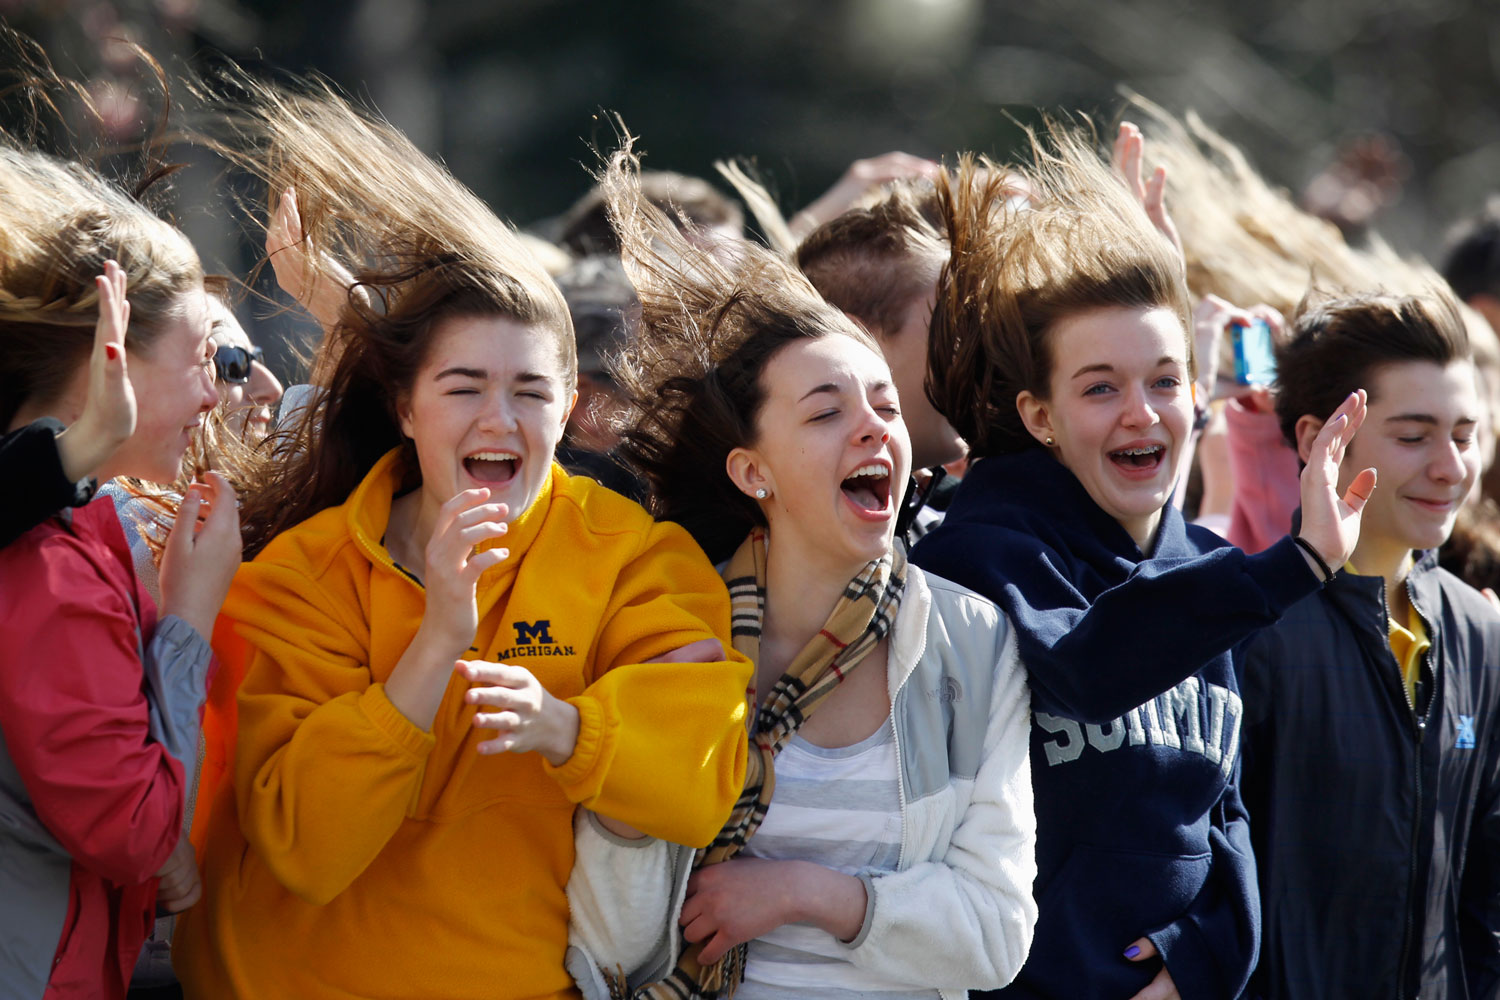 March 7, 2012. Visitors react to the rotor wash of the Marine One helicopter as President Barack Obama takes off from the South Lawn of the White House in Washington as he travels to North Carolina.